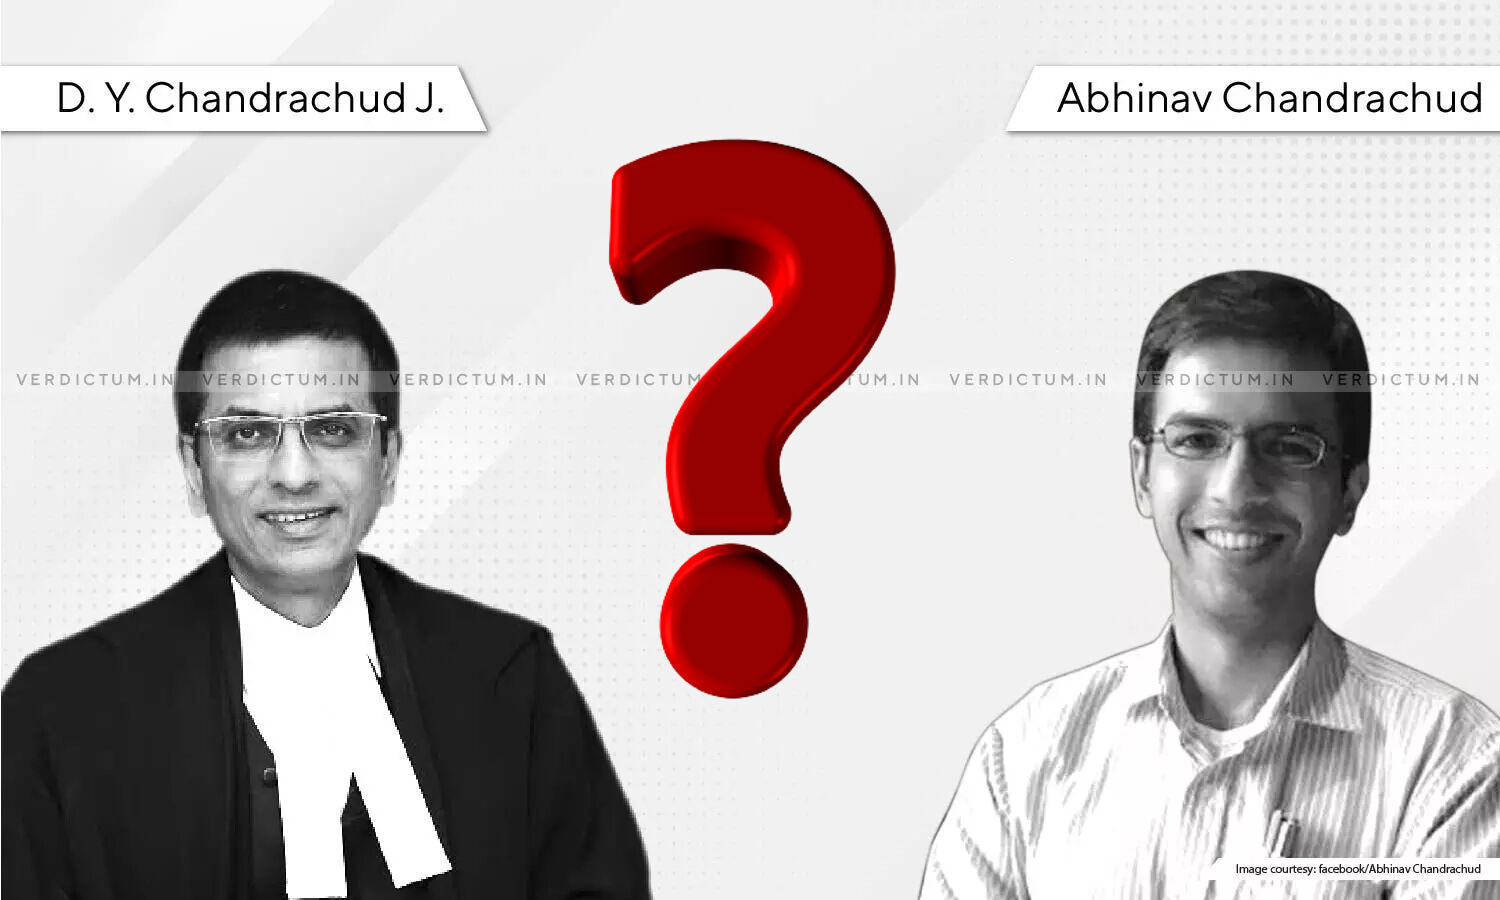 Fact Check: Did Justice D. Y. Chandrachud Hear A Case Related To His Son's Client?